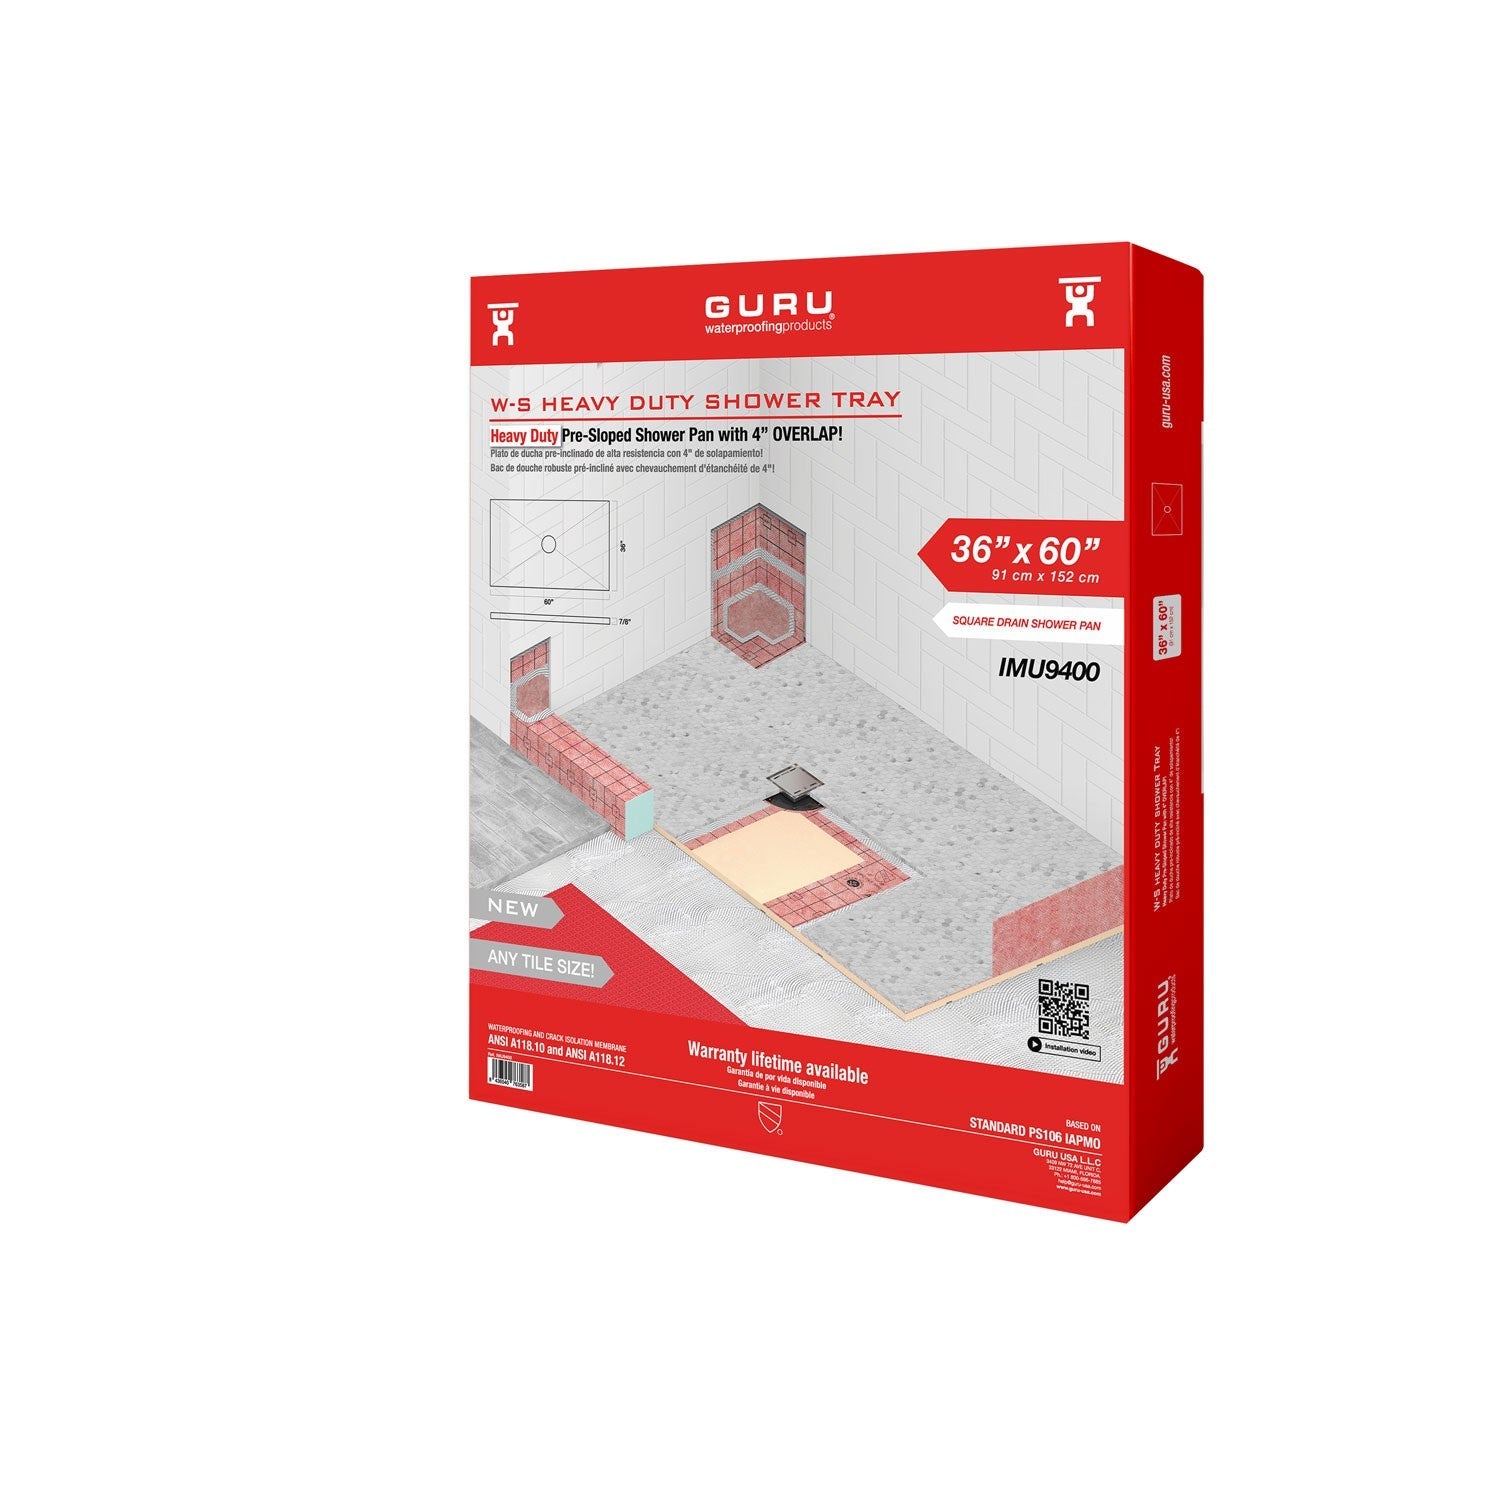 GURU W-S heavy duty shower tray four slopes for square drains